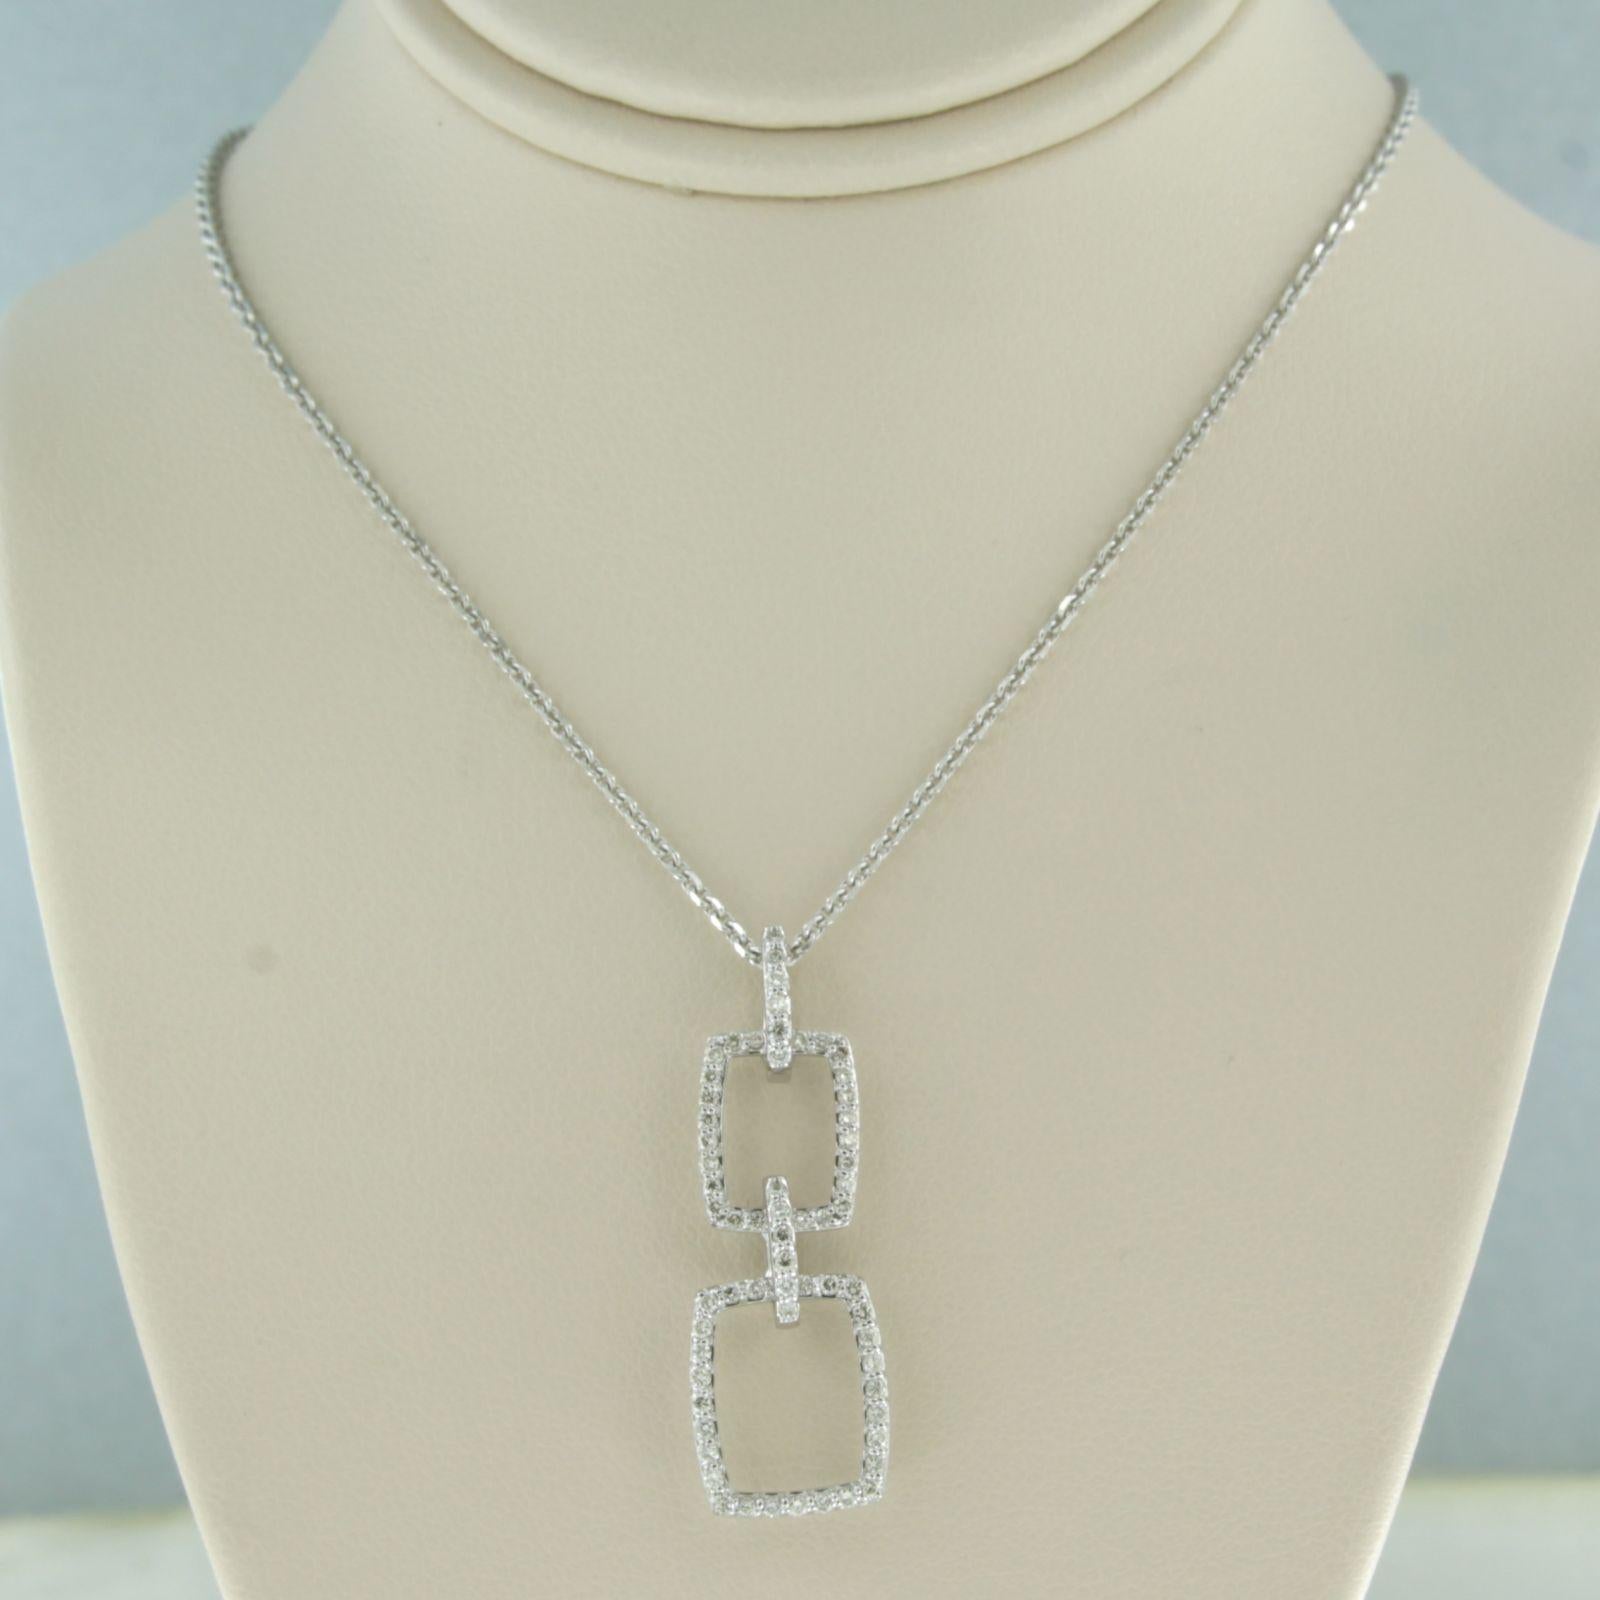 18k white gold necklace and pendant set with brilliant cut diamonds up to. 0.38ct - F/G - VS/SI - length 40 cm

detailed description:

Necklace length is 40 cm long and 0.8 mm wide

the pendant is approximately 3.3 cm by 1.1 cm wide

total weight